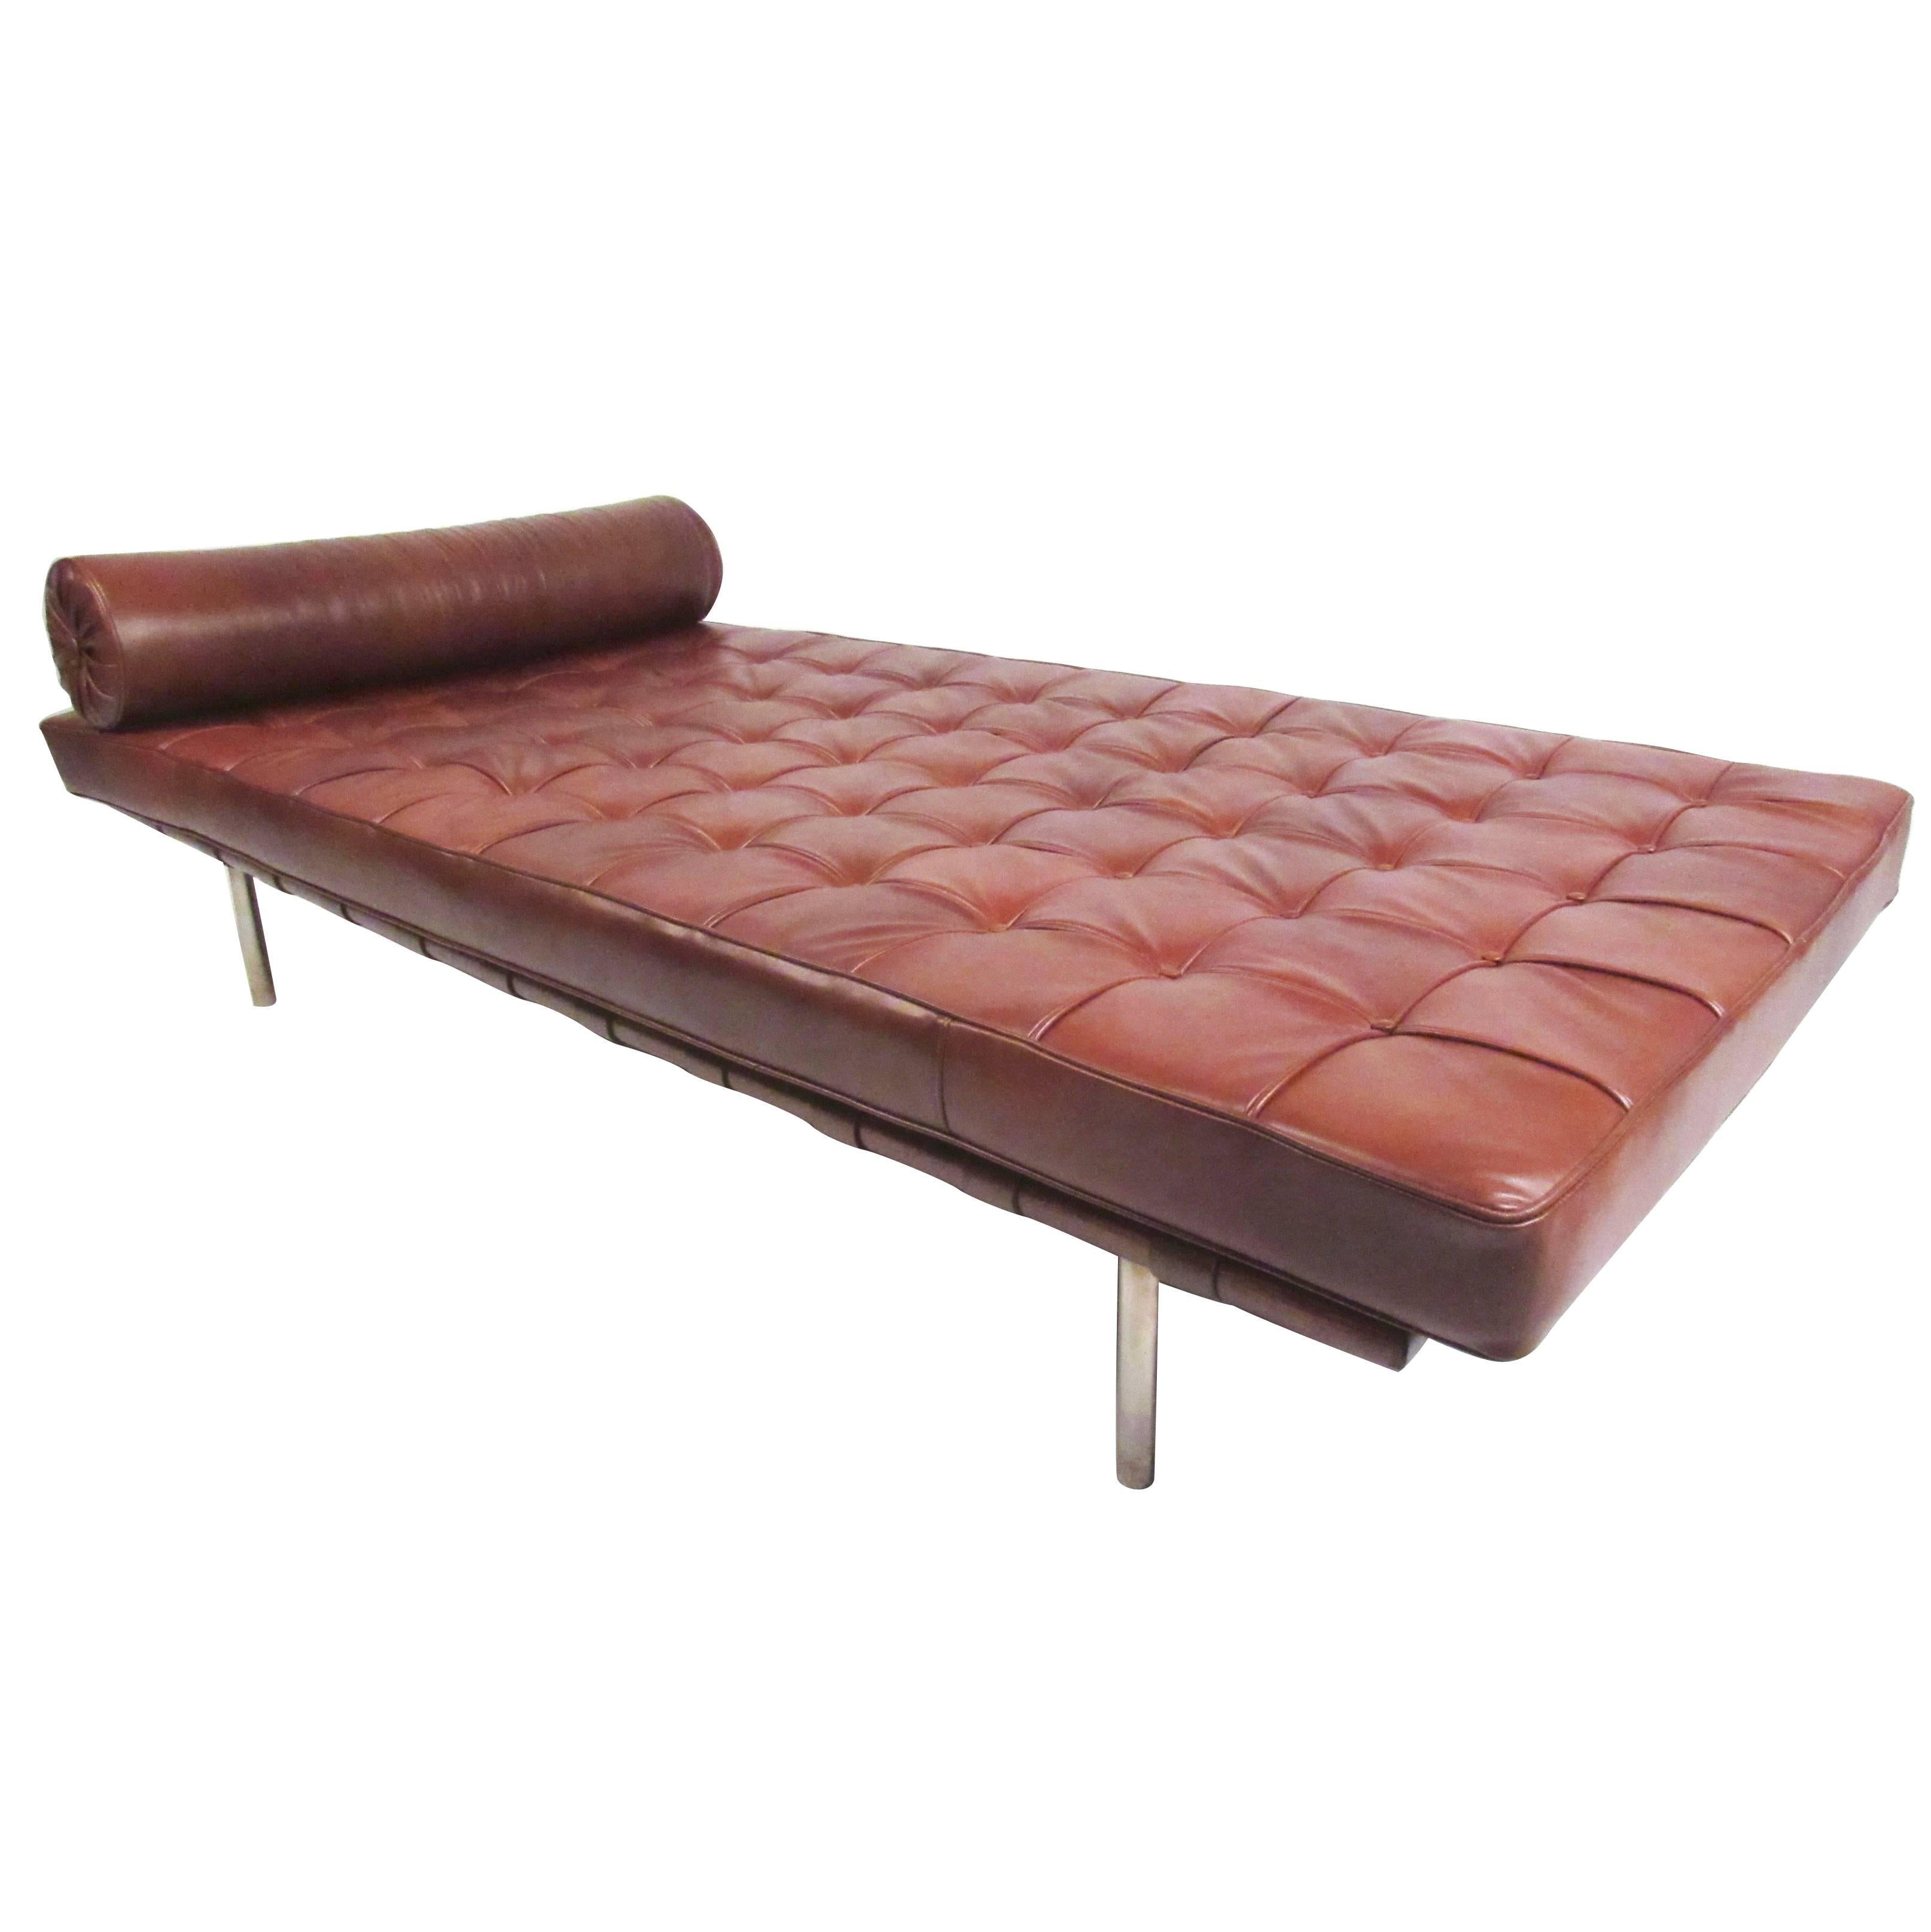 Ludwig Mies van der Rohe Leather Daybed for Knoll Associates